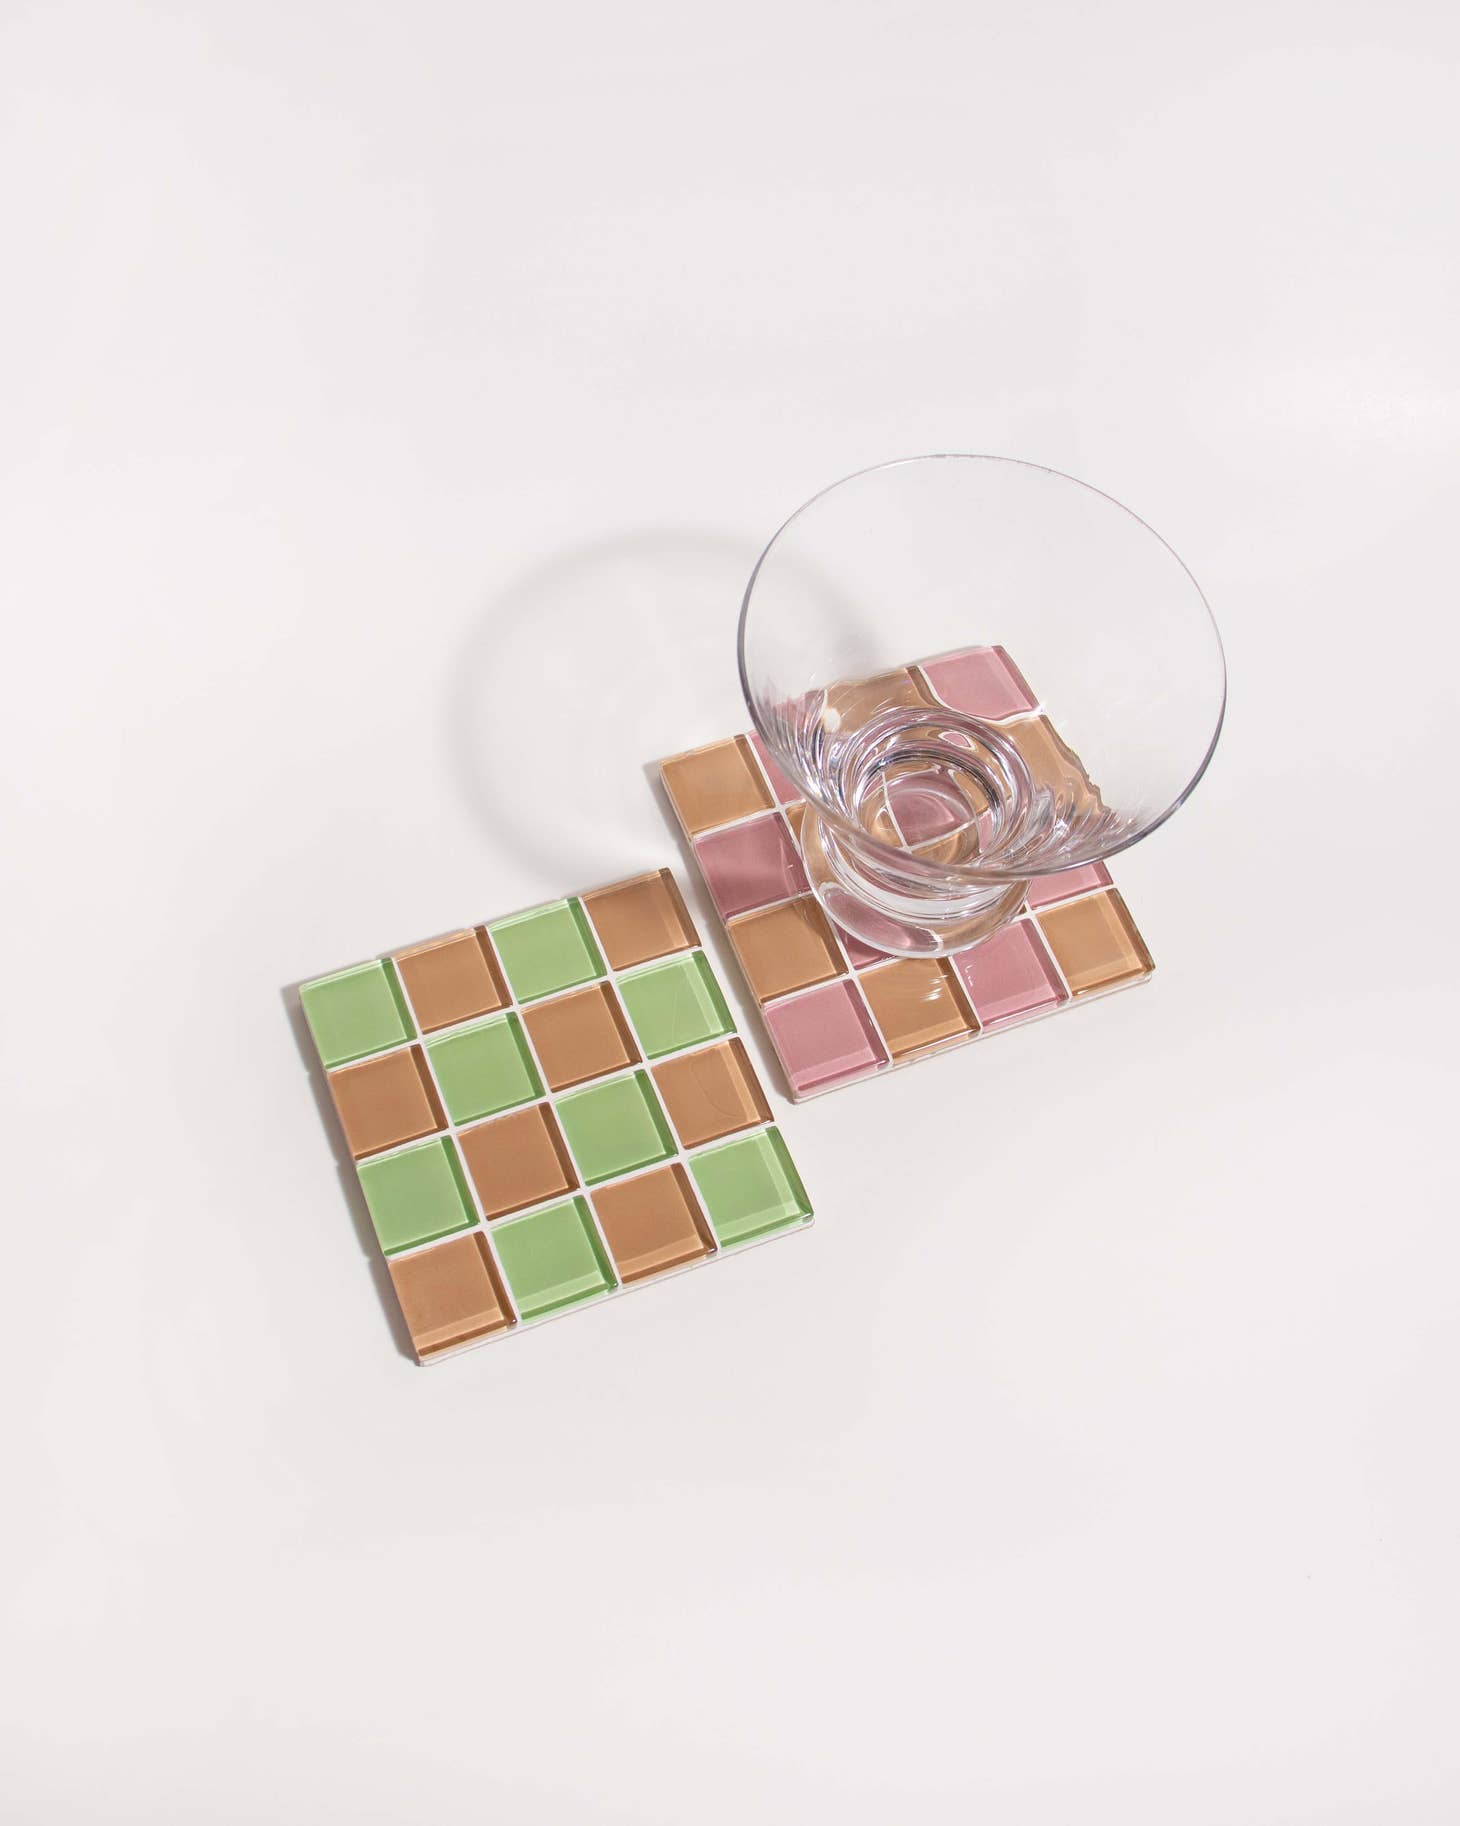 Handcrafted coasters made with high quality glass tiles. They don't just have to be a coaster though, use them for whatever your heart desires honestly. They're just dreamy little pops of color for your space! 